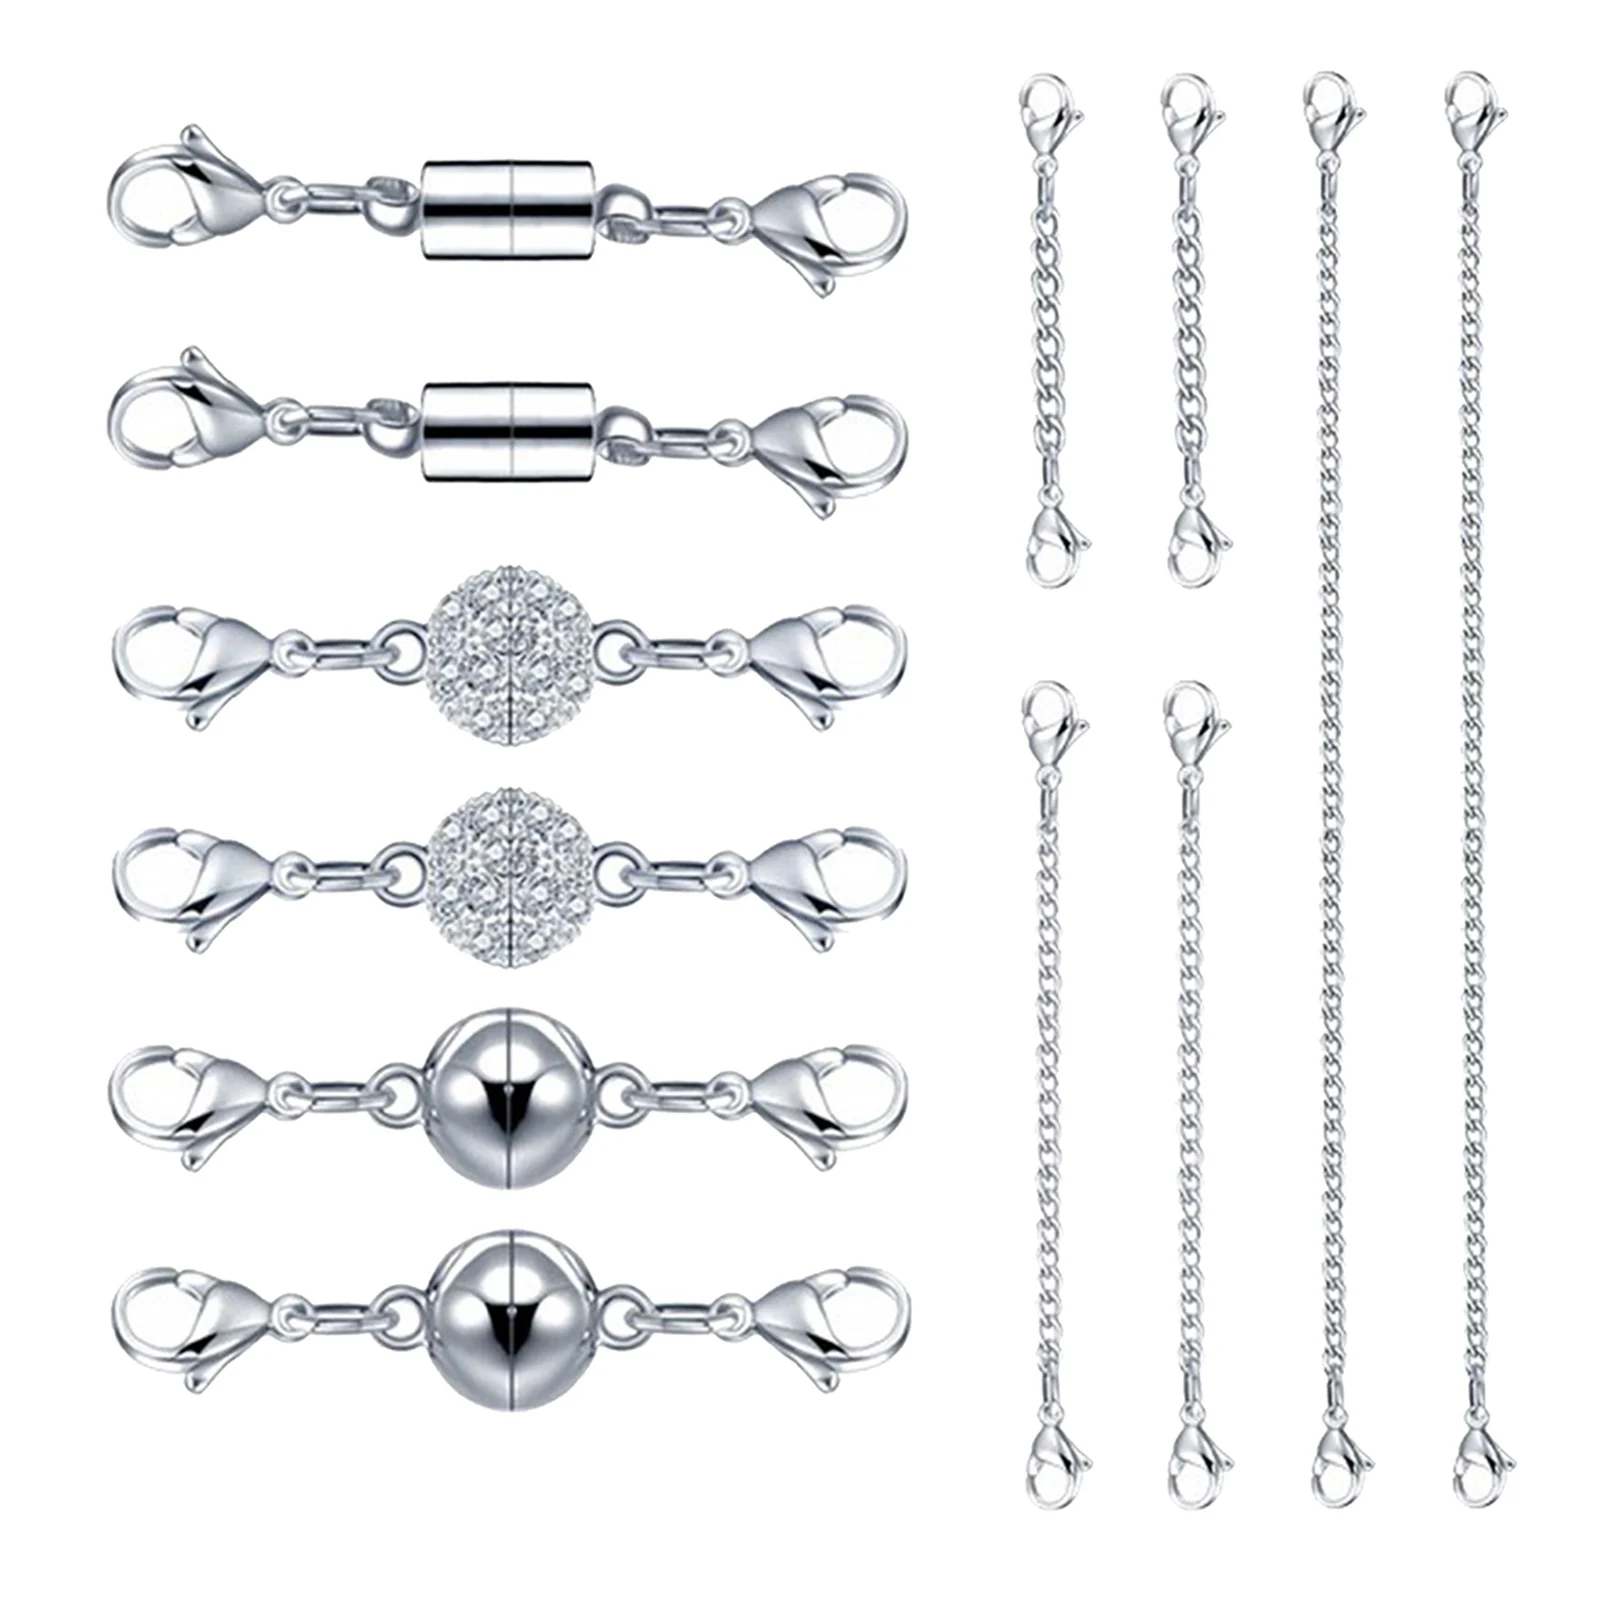 12pcs Silver Magnetic Lobster Clasps Extender Chain, Jewelry Necklace Bracelet Making Crafting Connector Extender Magnetic Clasp